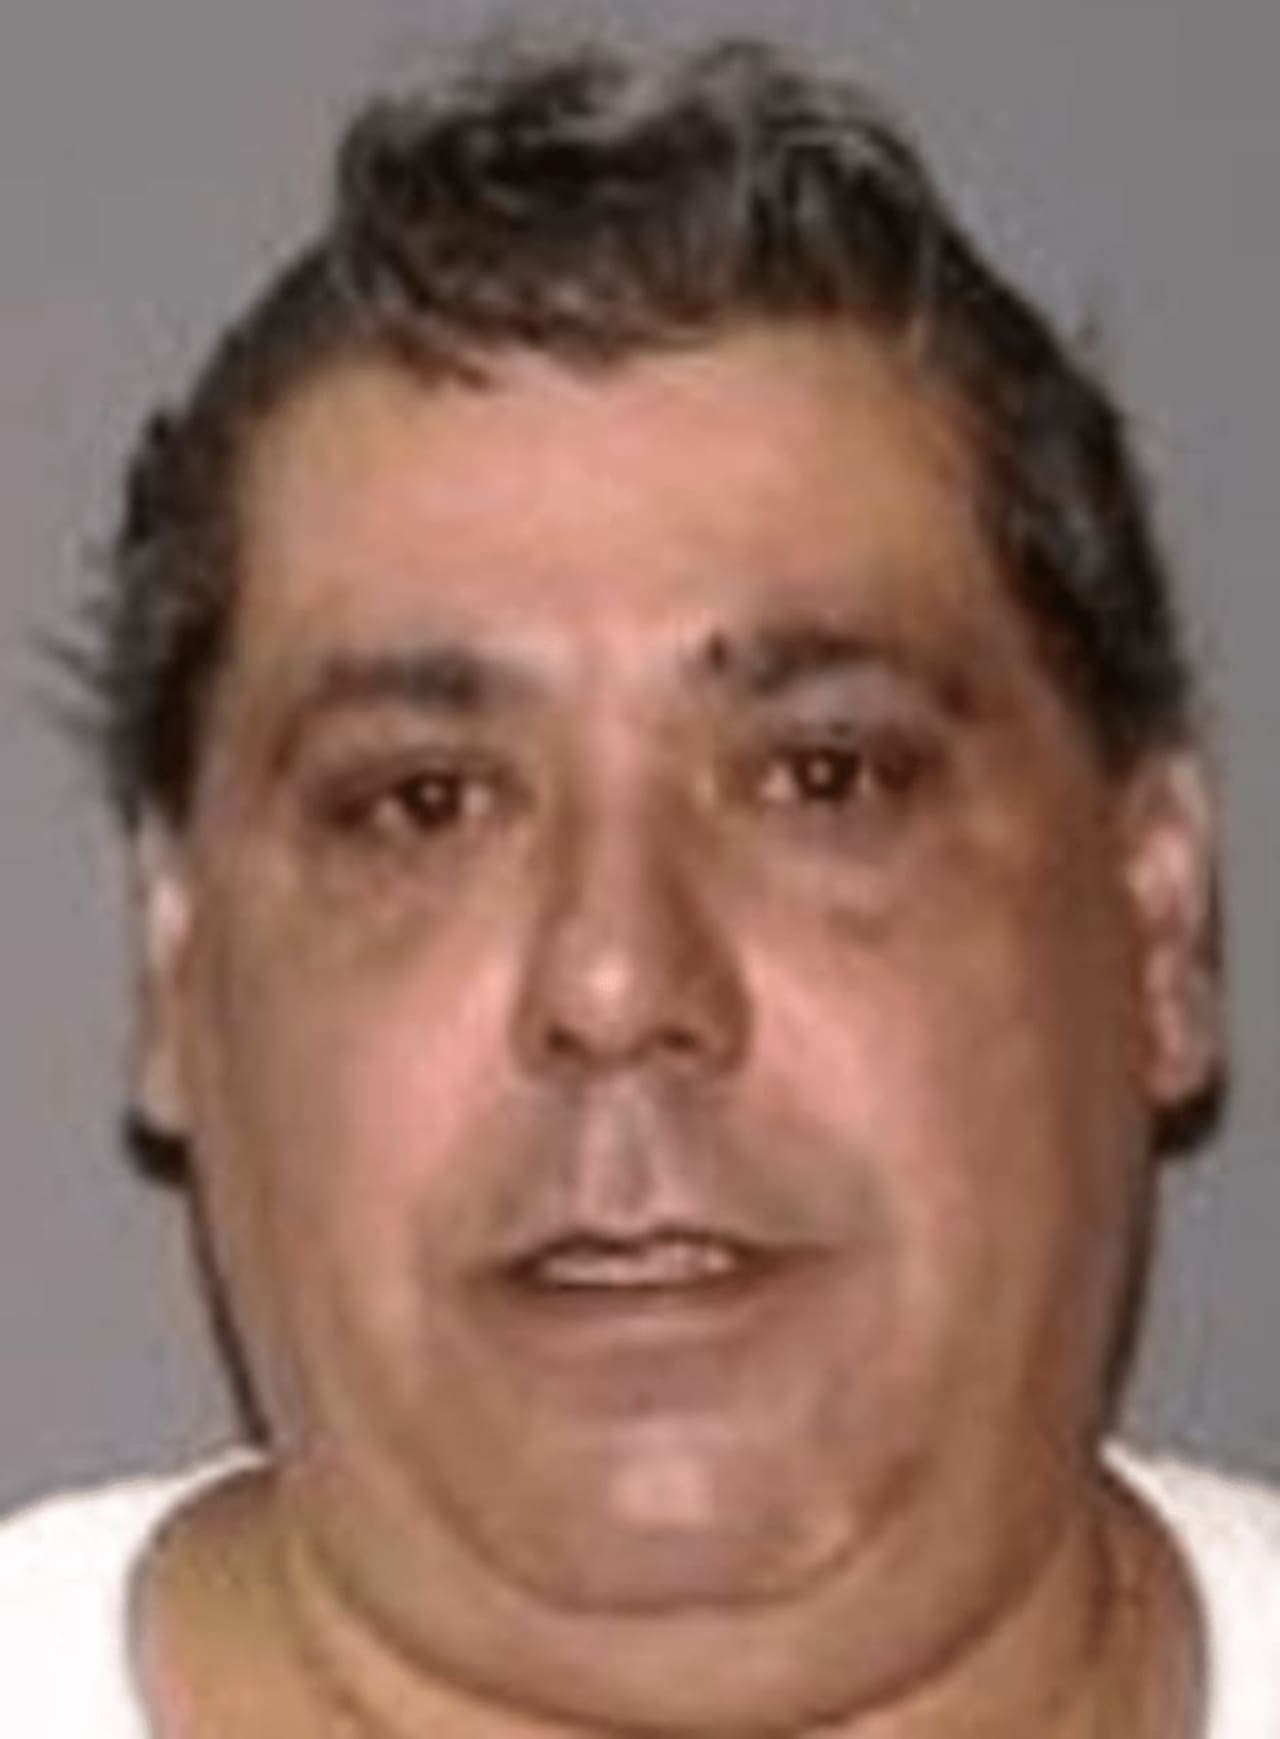 The Hudson Valley has been issued an alert regarding the whereabouts of Wilberto Reyes, 64.